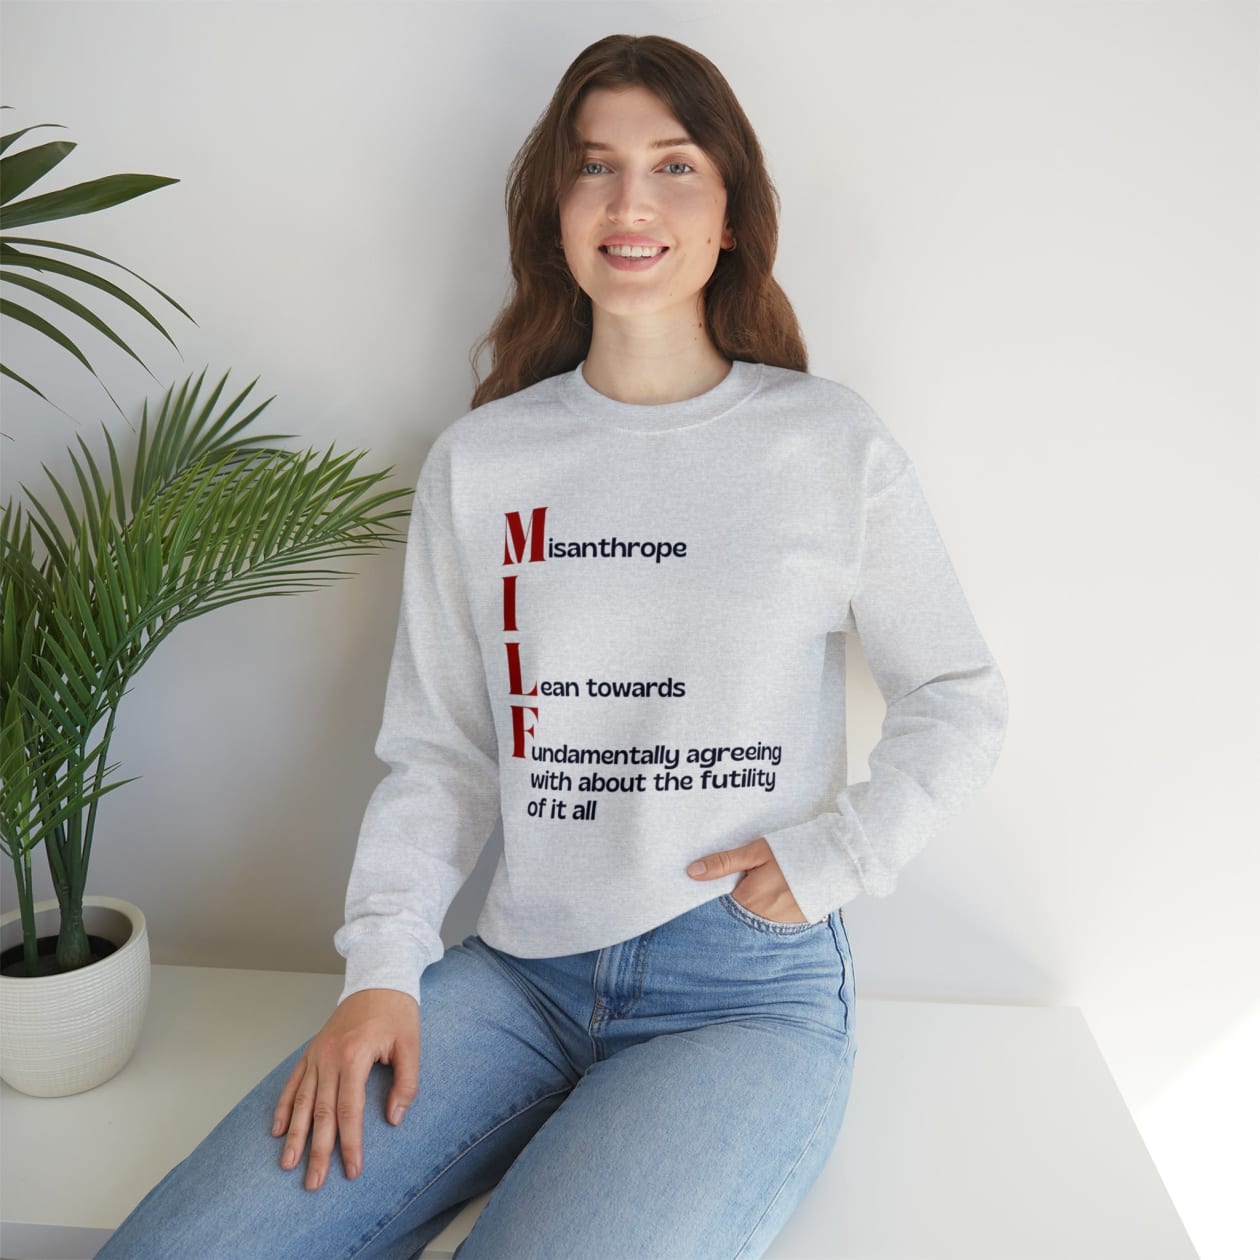 MILF Misanthrope I Lean Towards Fundamentally Agreeing With About the Futility of It All Unisex Heavy Blend™ Crewneck Sweatshirt Sizes SM-5XL | Plus Size Available - Color: Ash, Size: S